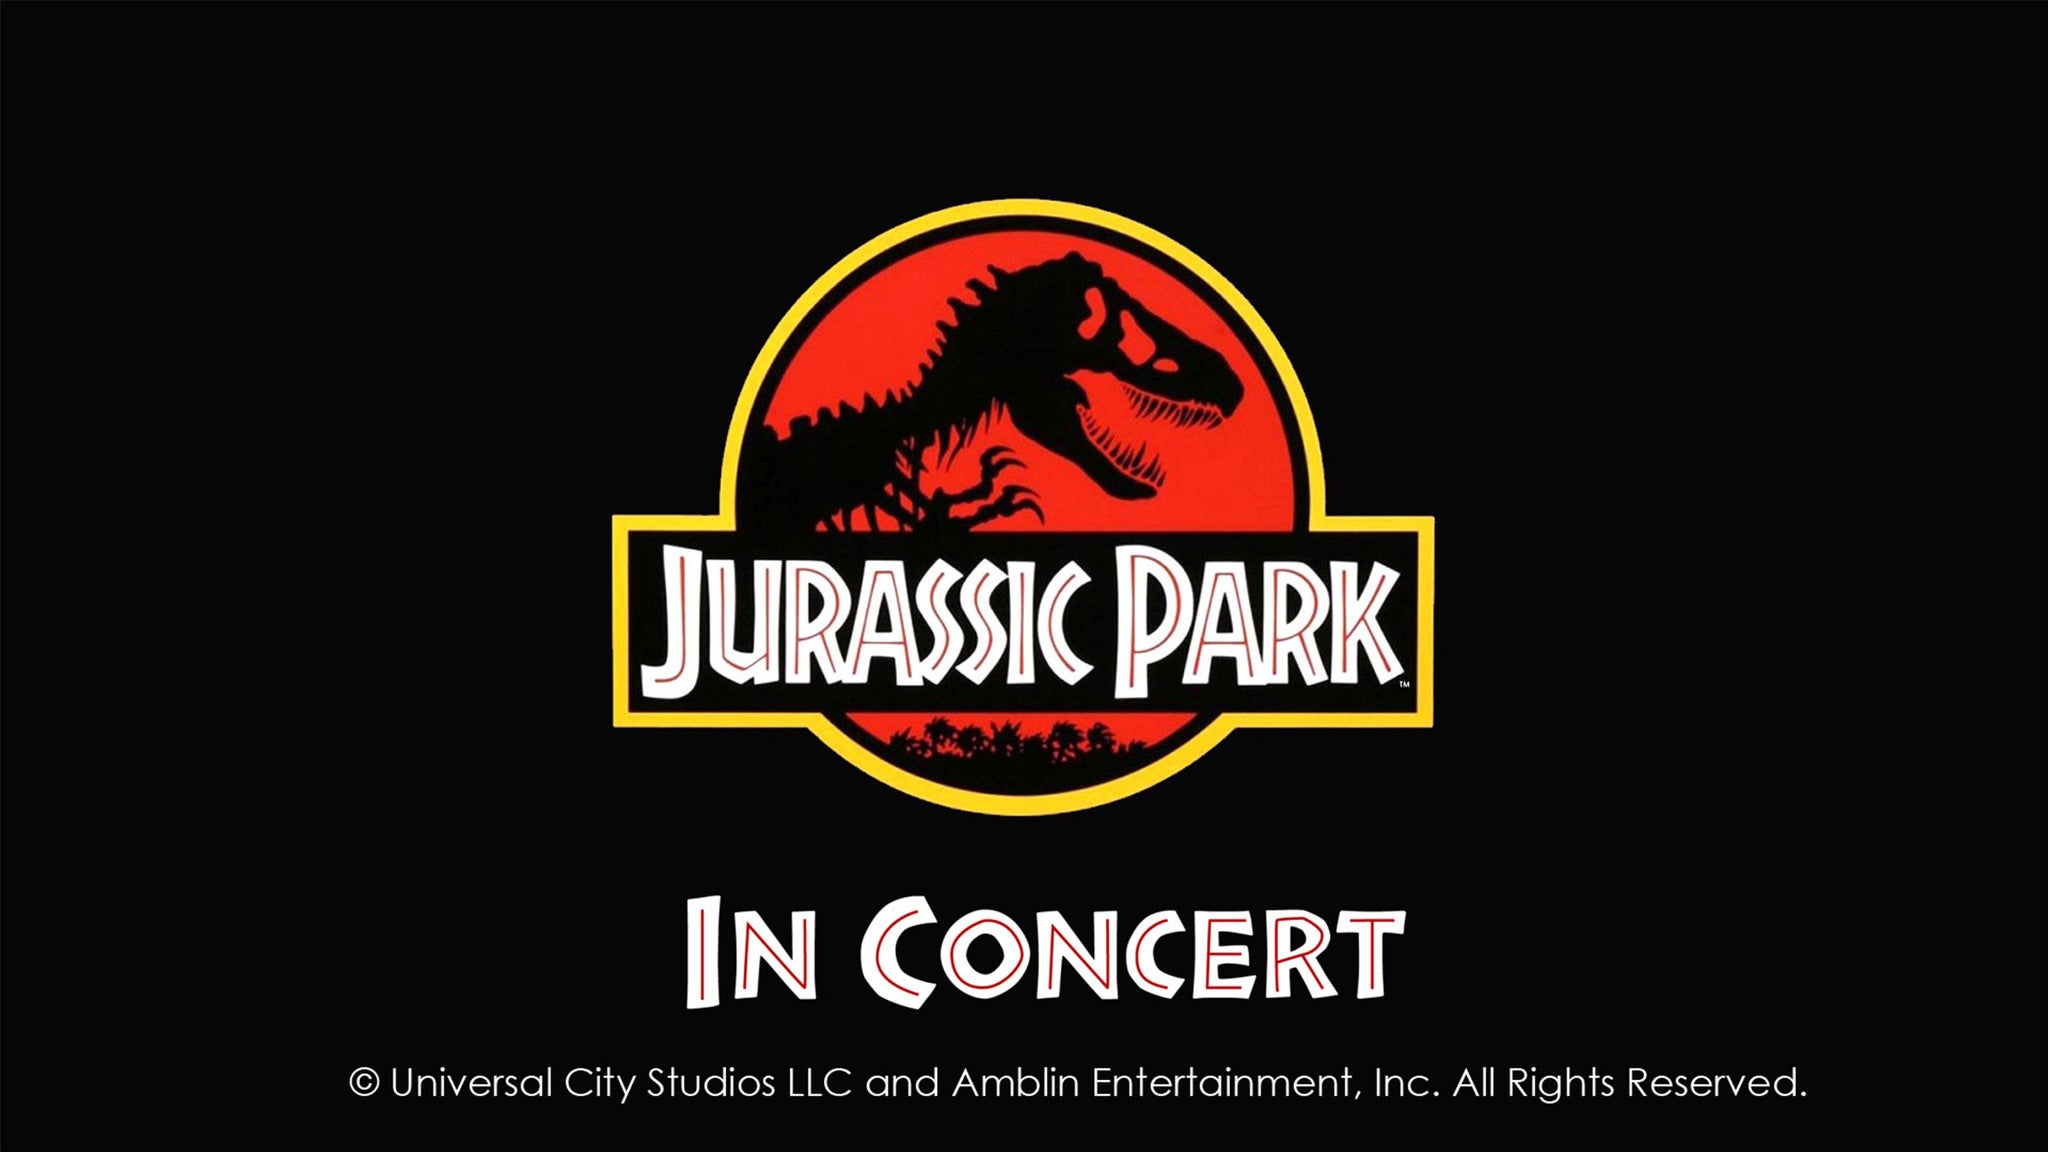 Montgomery Symphony Orchestra Presents Jurassic Park In Concert